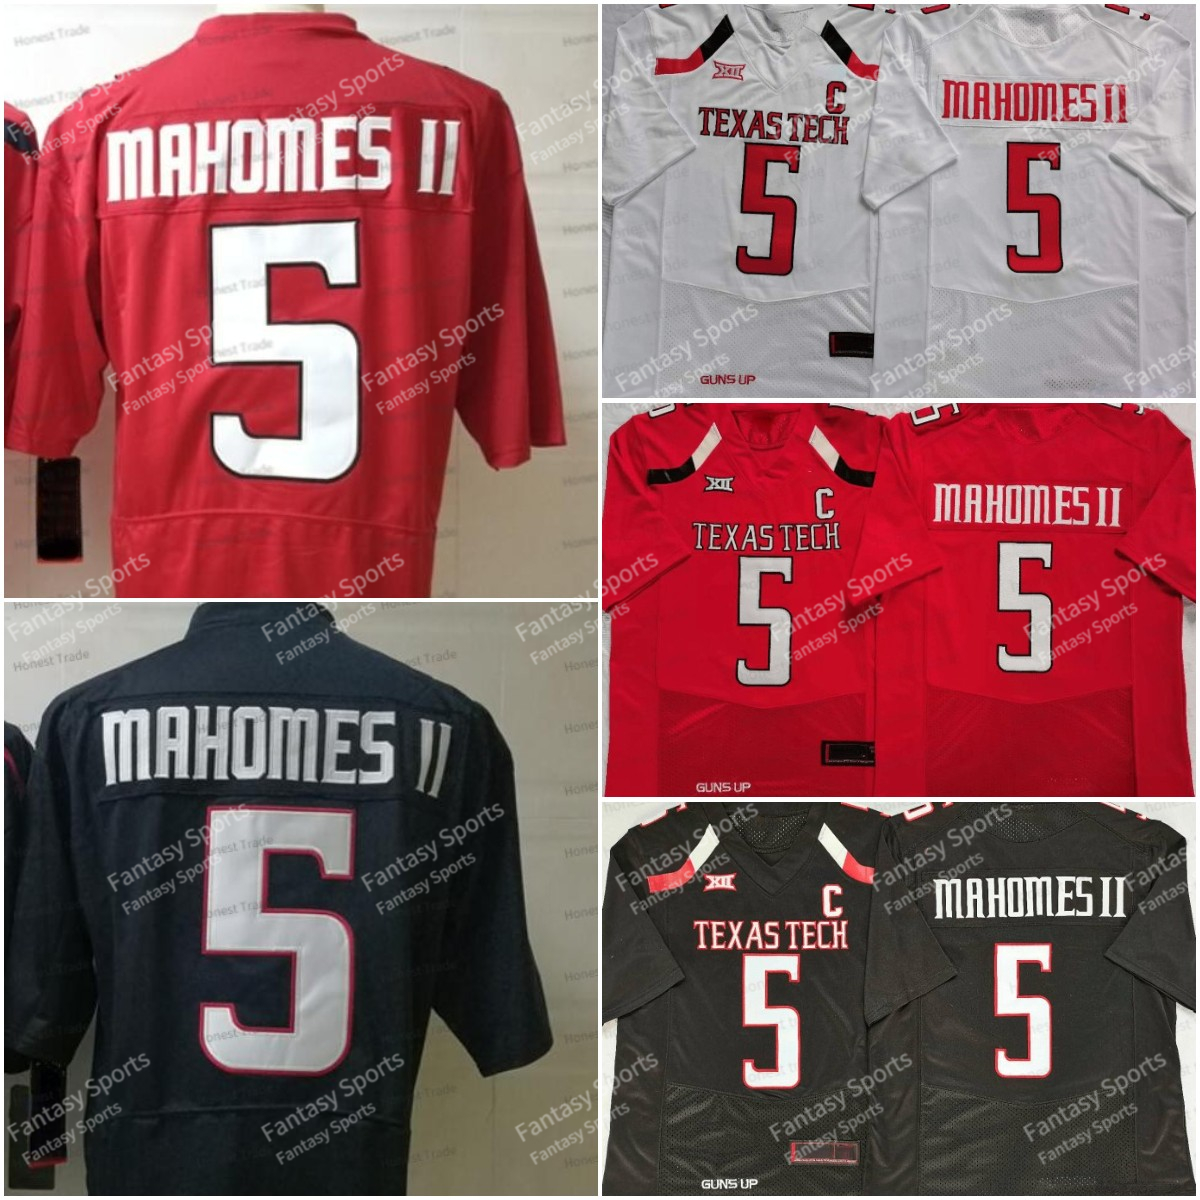 College 5 Patrick Mahomes II Jersey Texas Tech College Football Jerseys Herr Sömda Red Grey White Black Mesh Outdoors Sports 150th Patch